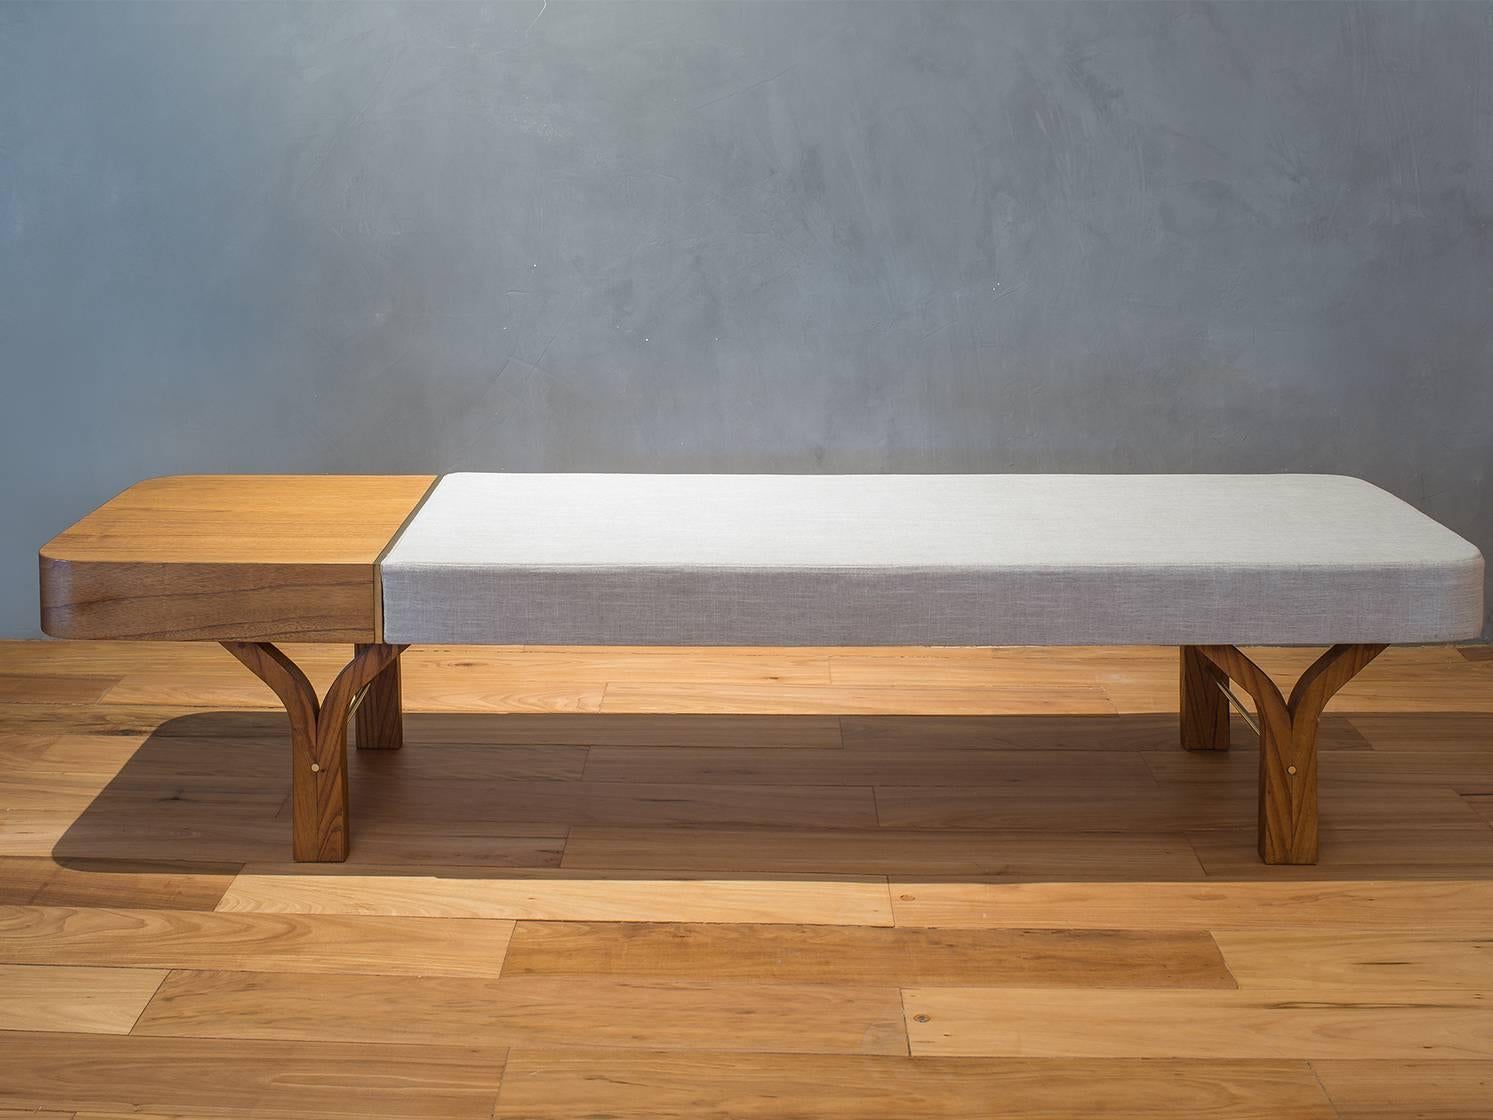 Metal Due Brazilian Contemporary Wood Bench and Table by Lattoog